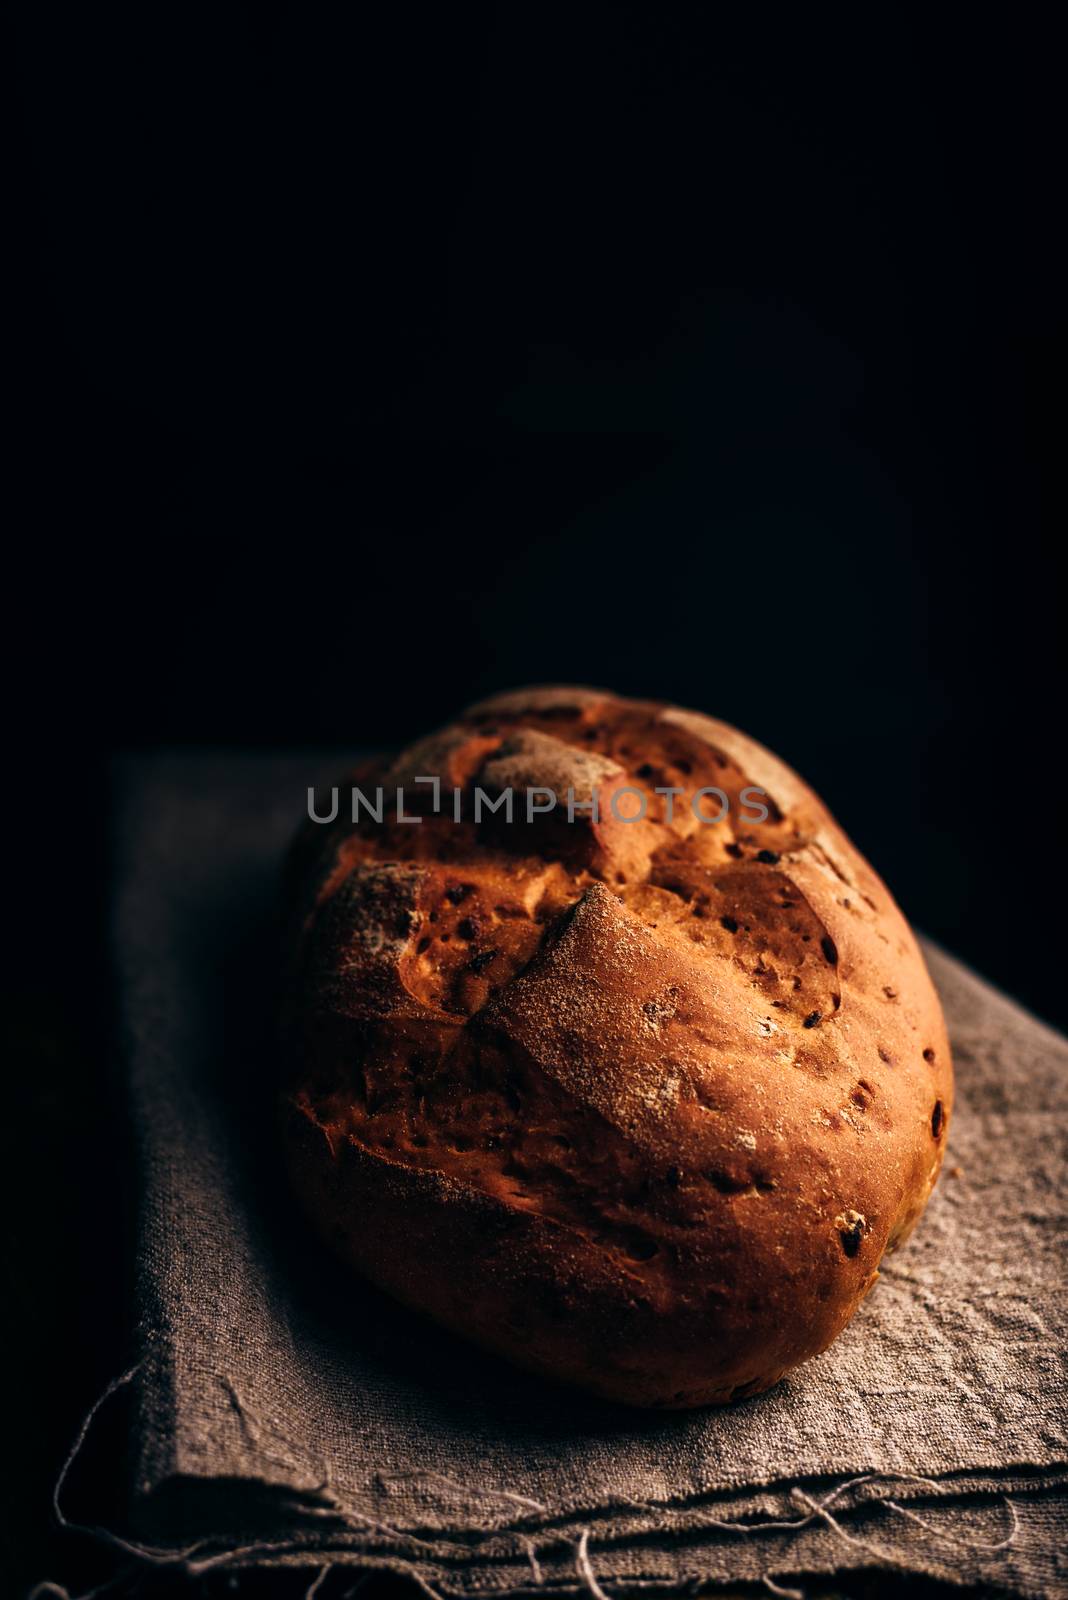 Loaf of Bread on Grey Cloth. Dark Background and Copy Space on the Top.